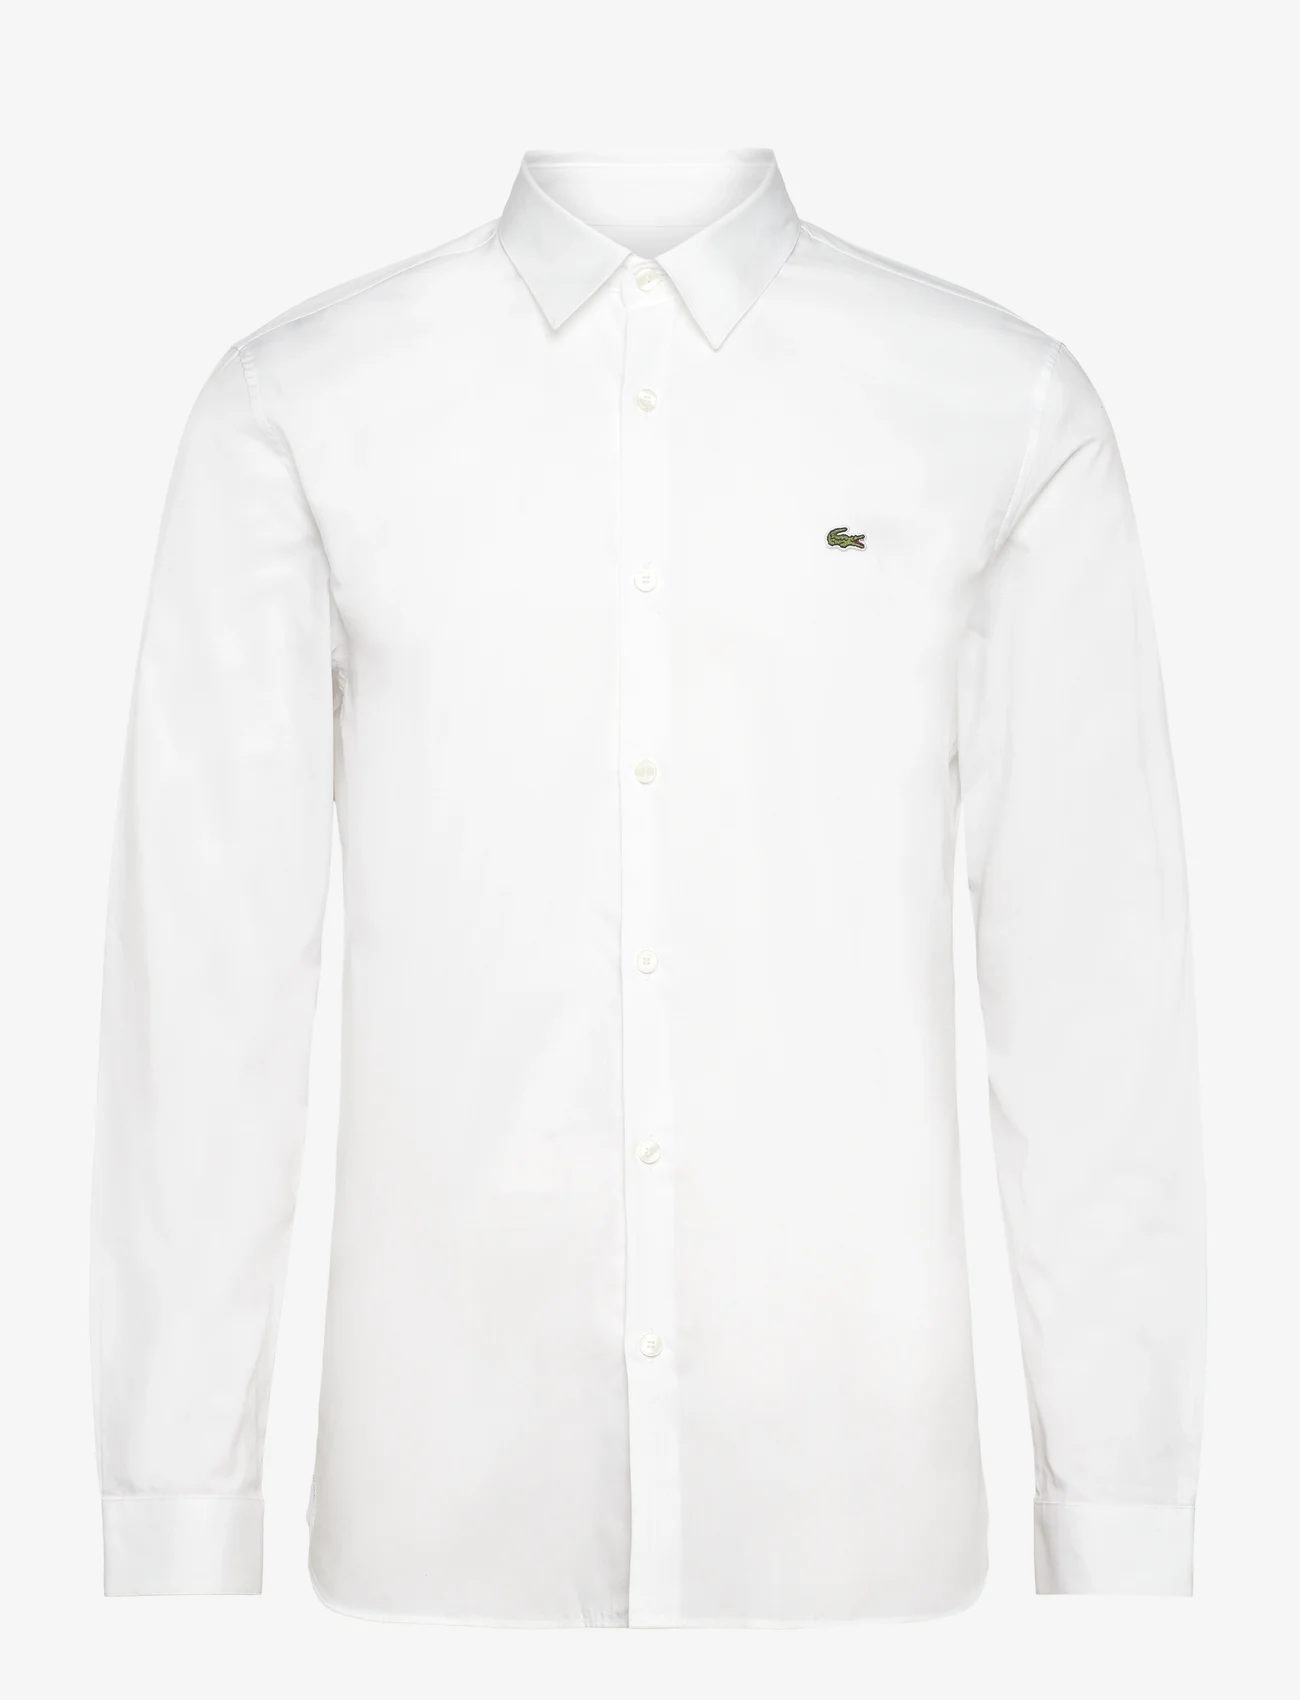 Lacoste - WOVEN SHIRTS - casual shirts - white - 0